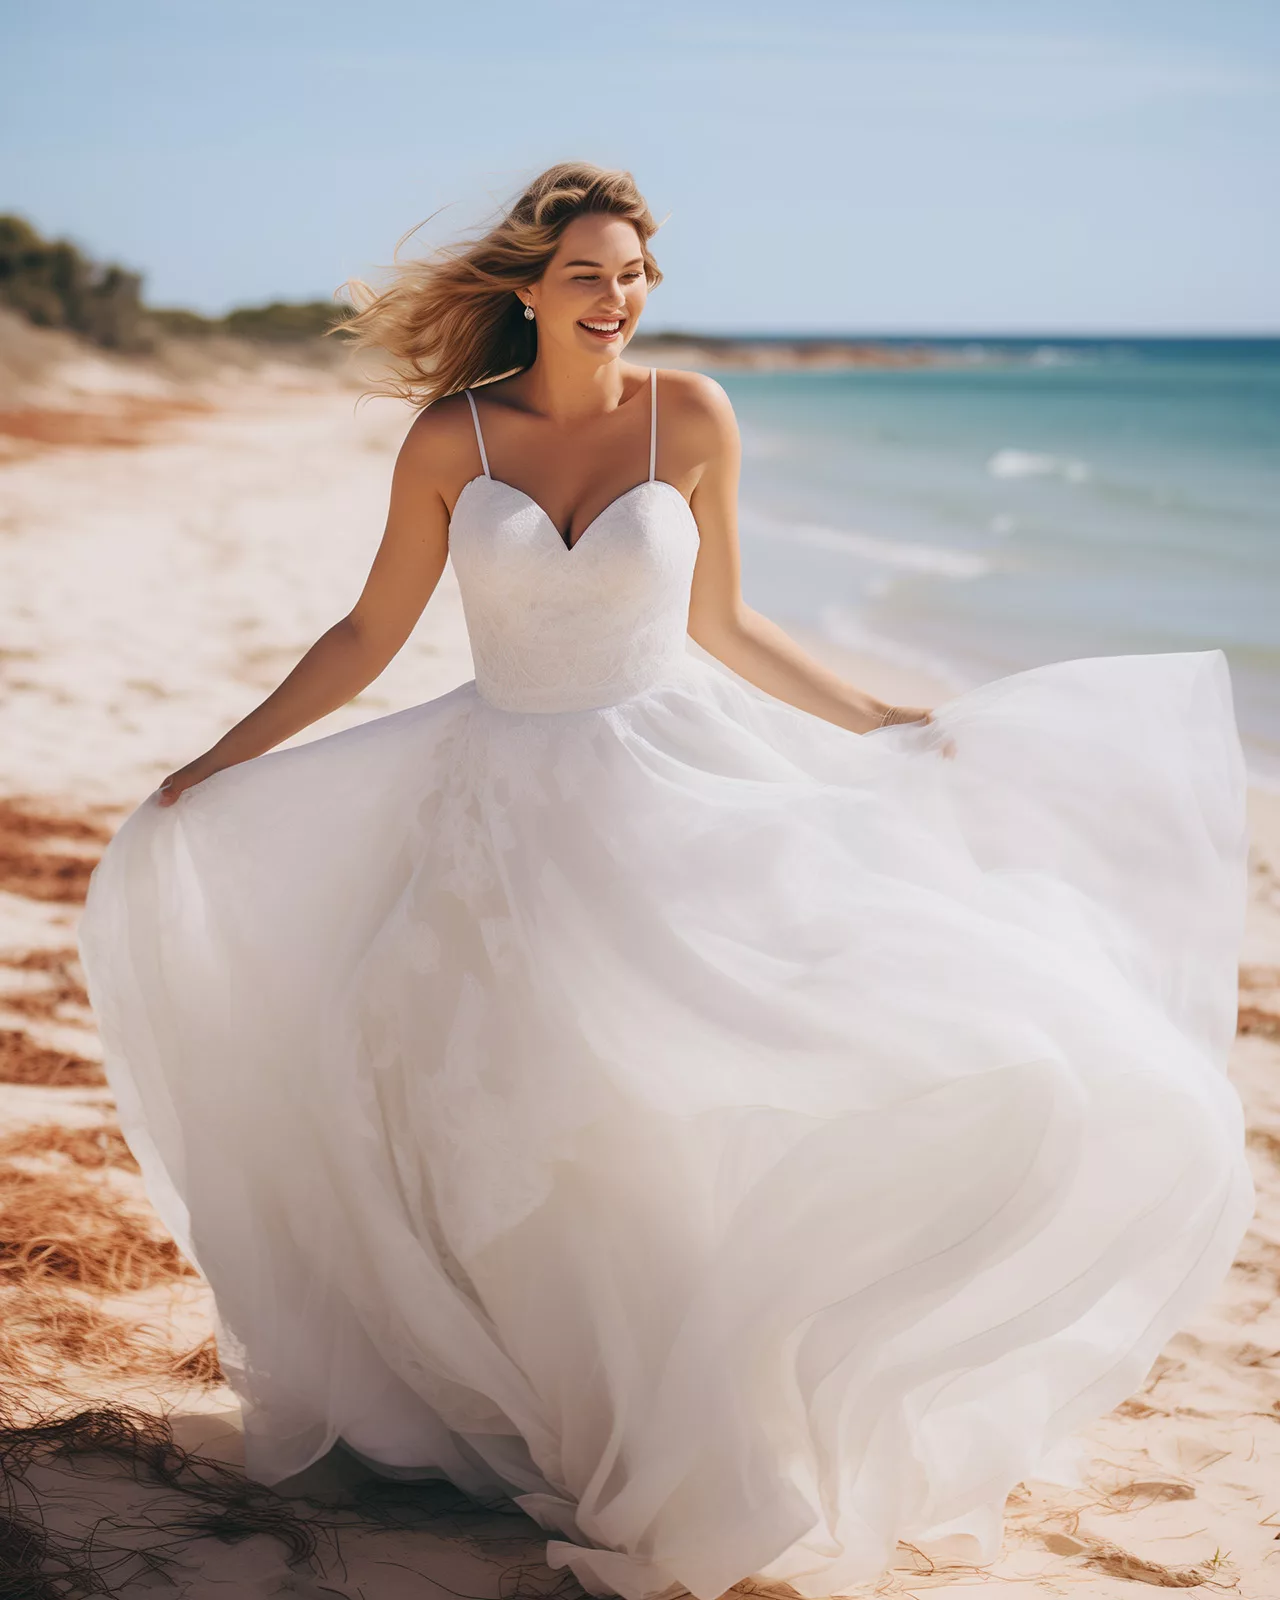 5 Reasons Why You Should Consider An A-Line Gown